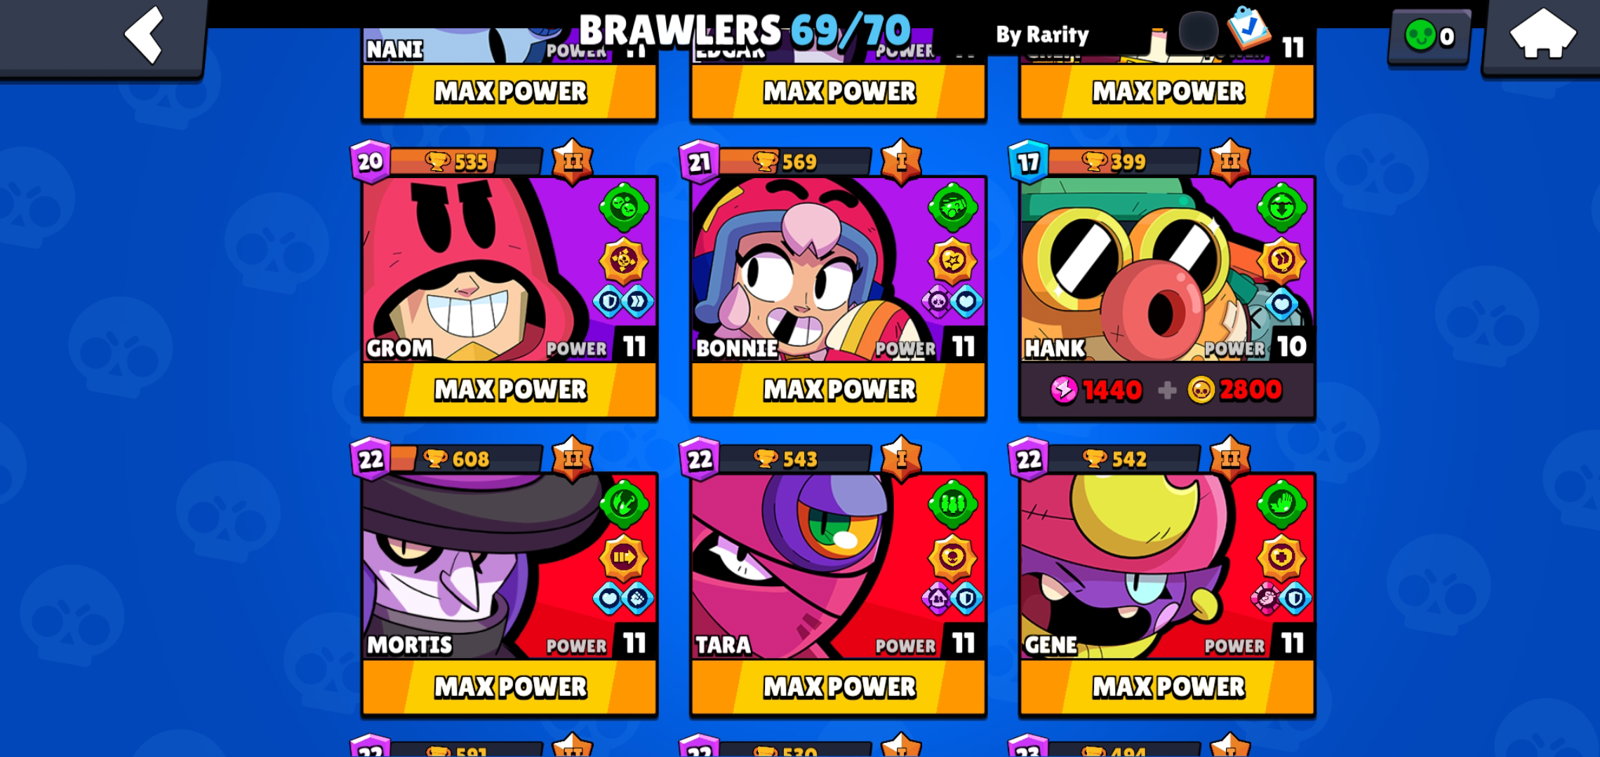 SELLING BRAWL STARS ACCOUNT FOR ADOPT ME PETS OR ROBUX-ALL  INFORMATION-DM-CLASH OF CLANS AND CLASH ROYALE TOO BUT FOR THAT DMS- *££  ~HAS SKINS ALL WORTH ABOUT 700-1500 GEMS LOOKING FOR MIDDLEMAN